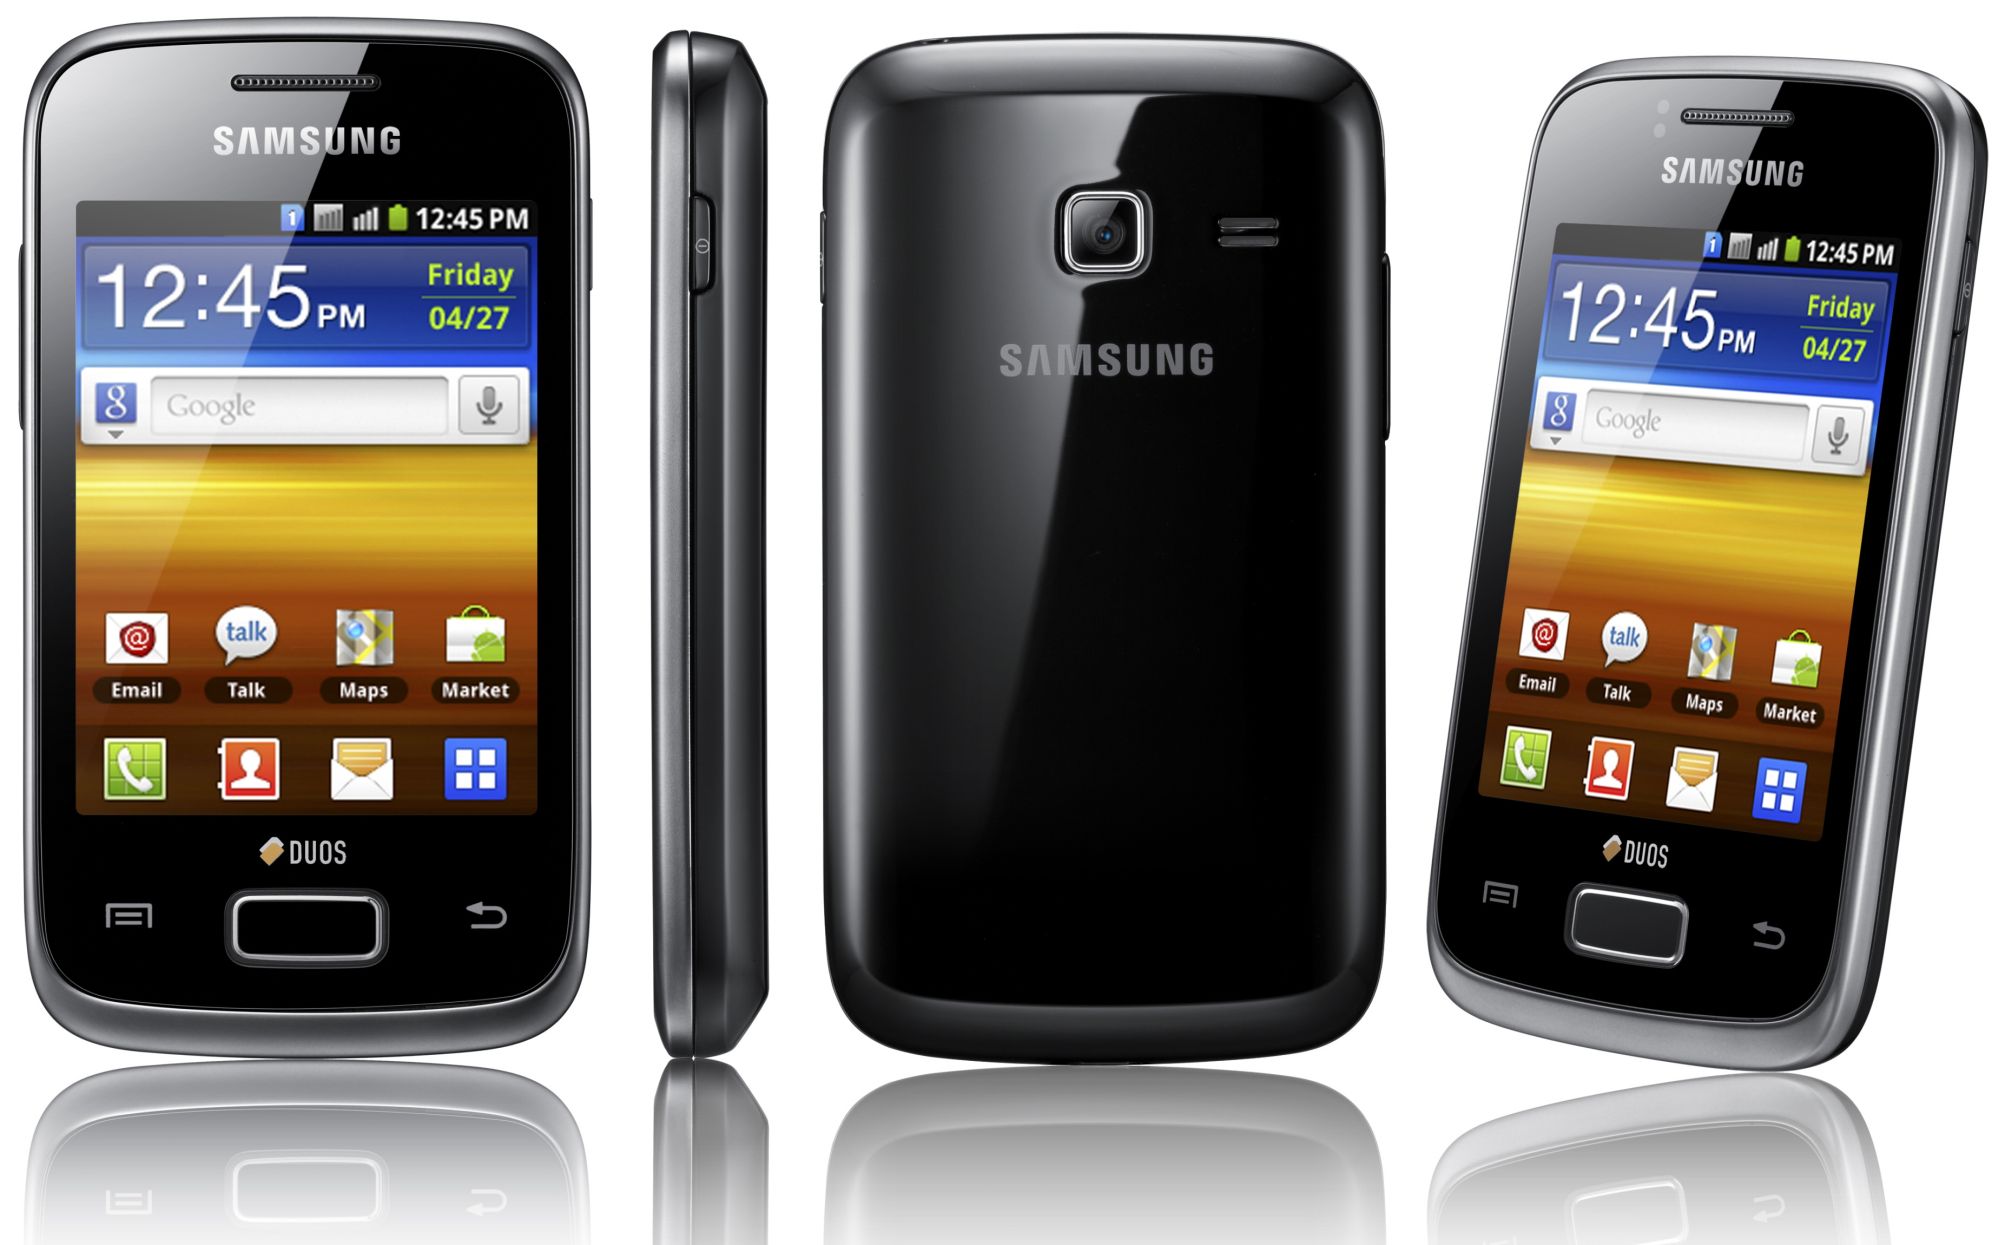 Samsung lifts the cover off its first dual-SIM smartphones: Galaxy Y Androids on budget